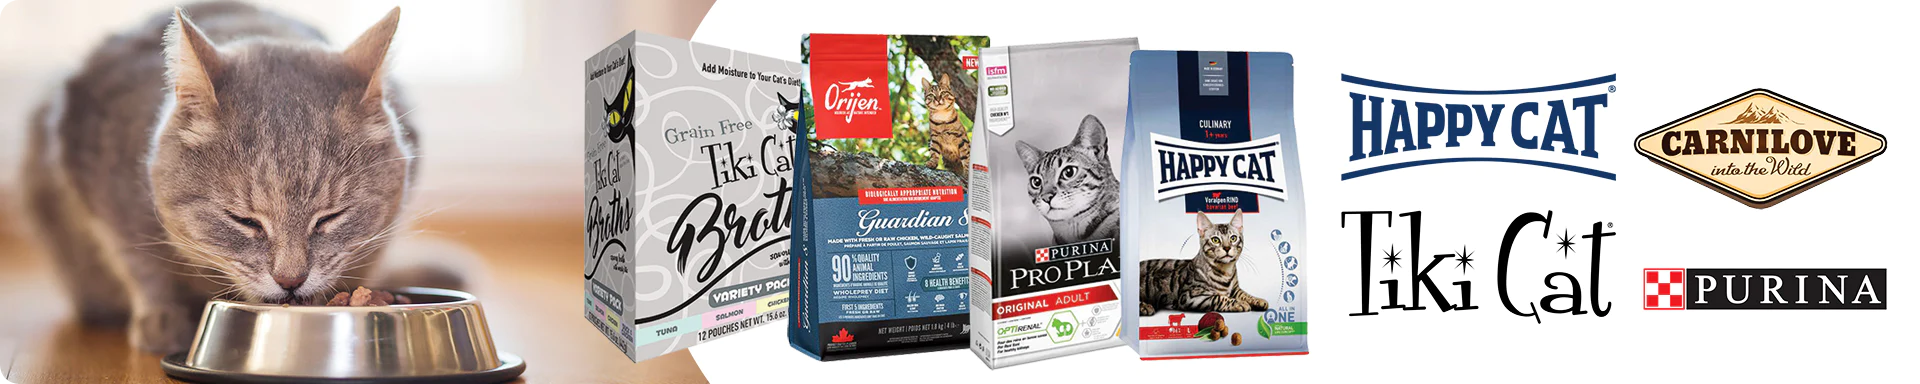 A close-up of a bag of premium cat food with a picture of a satisfied cat on the front, against a white background.